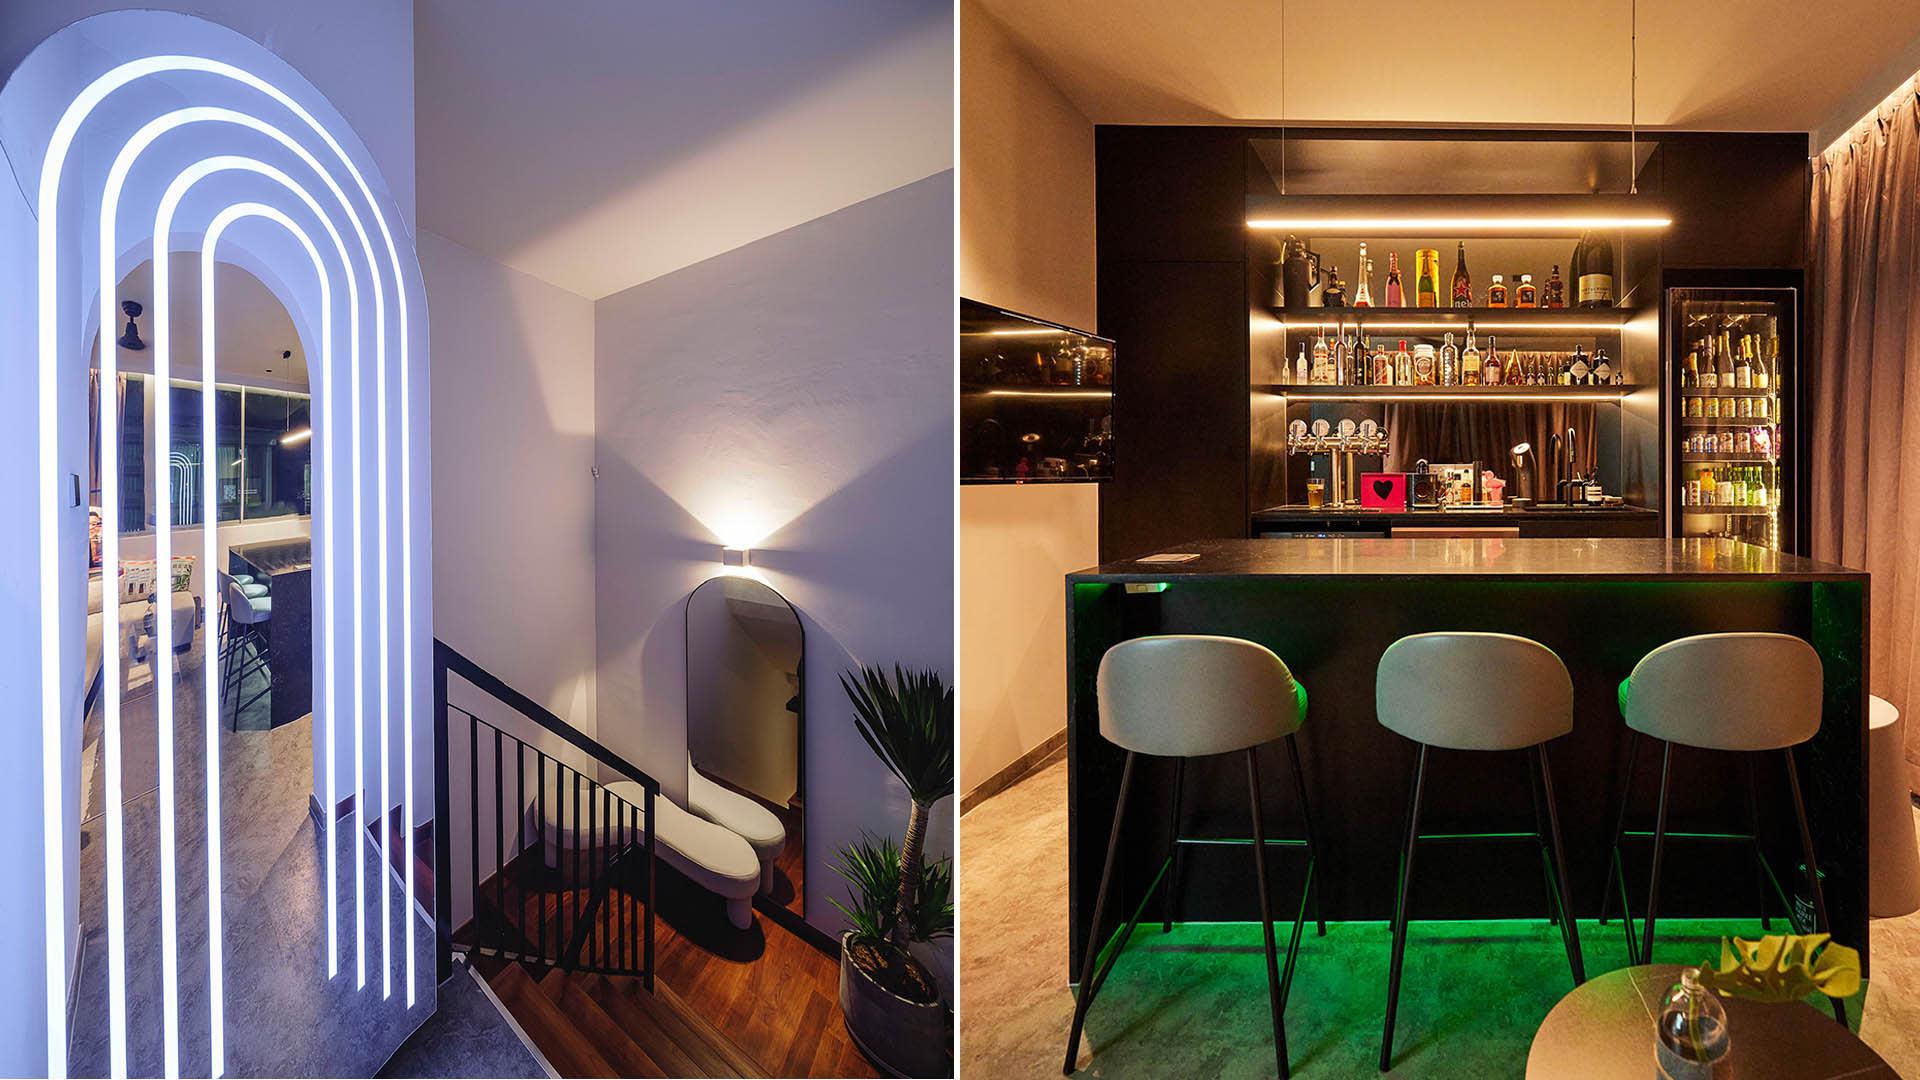 After A $130k Reno & Major Layout Changes, This Apartment’s Master Bedroom Has Been Turned Into A Home Bar